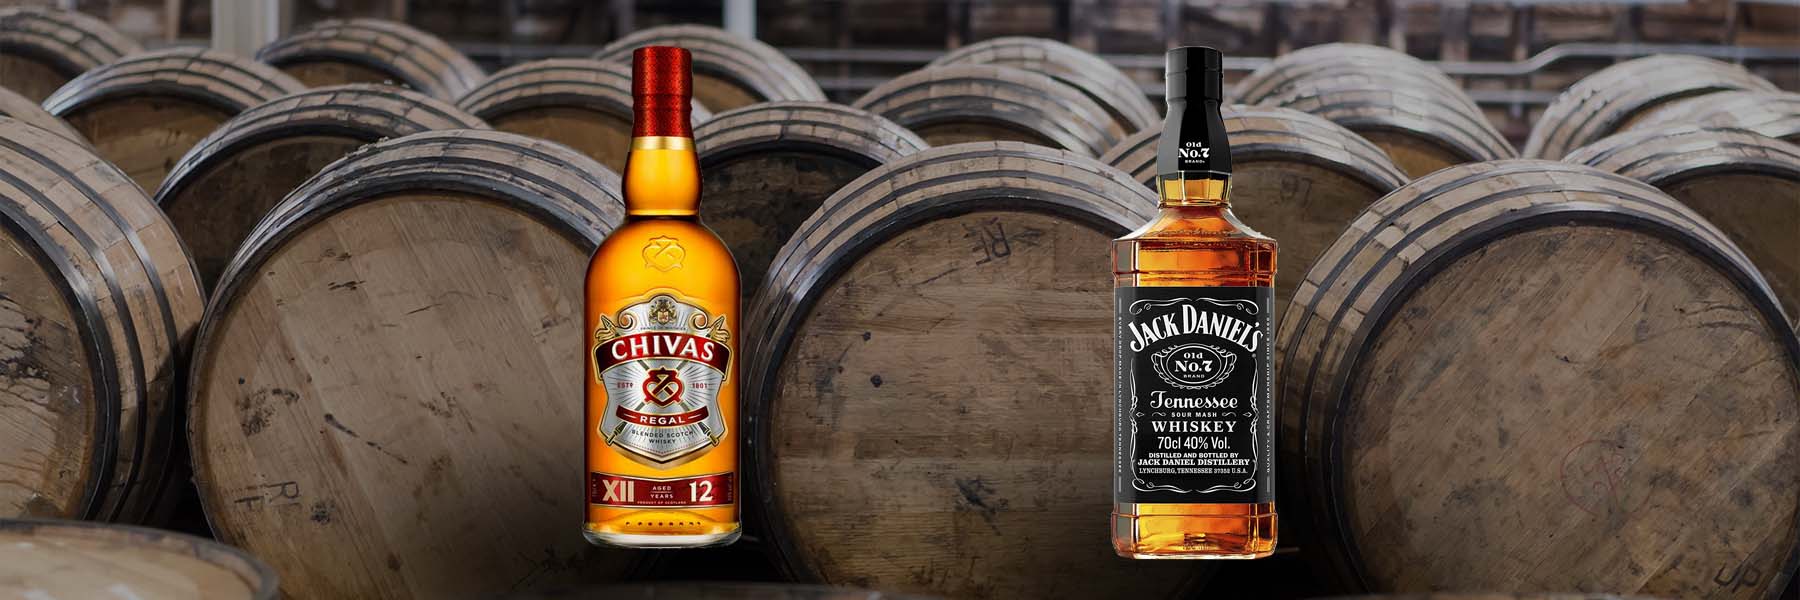 Chivas Regal vs Jack Daniels | Which will come out on top?